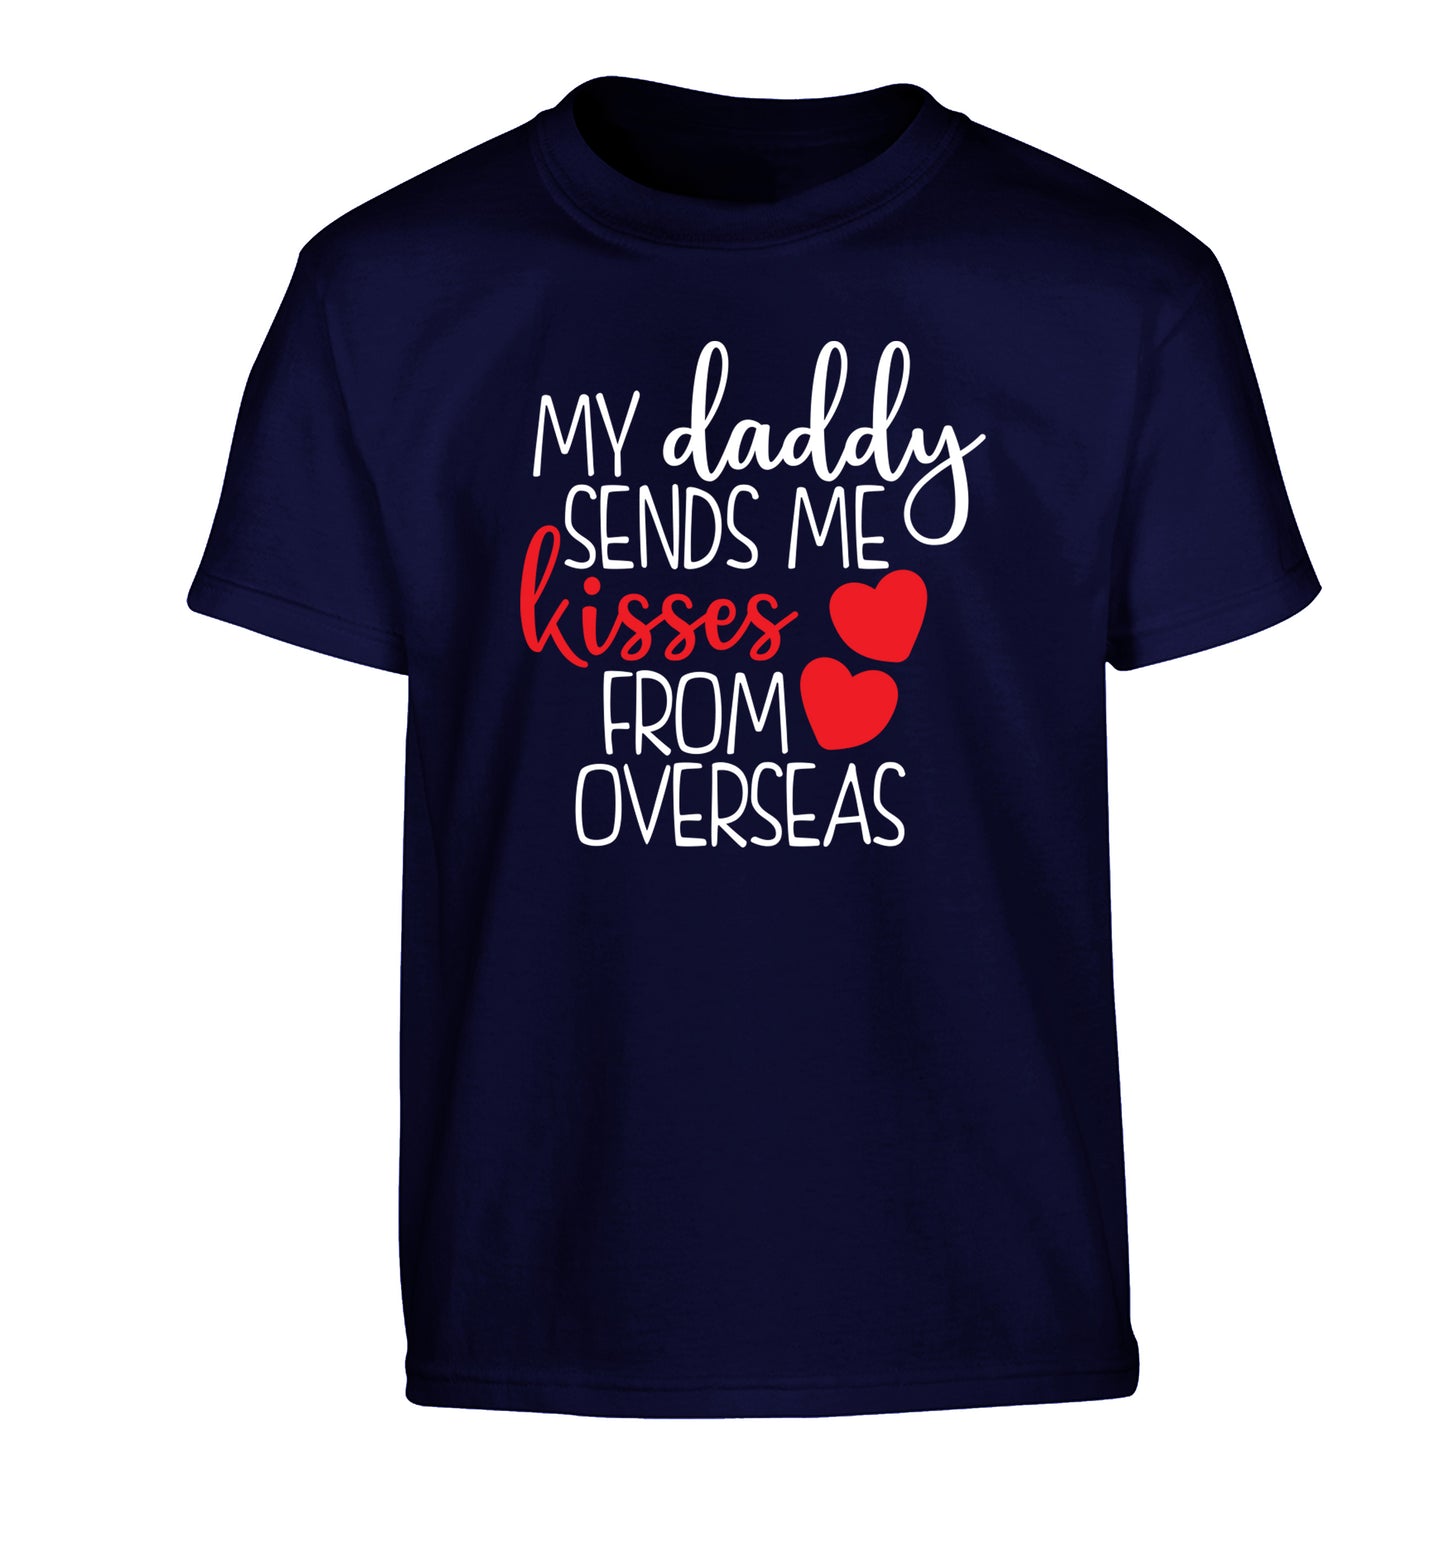 My daddy sends me kisses from overseas Children's navy Tshirt 12-13 Years